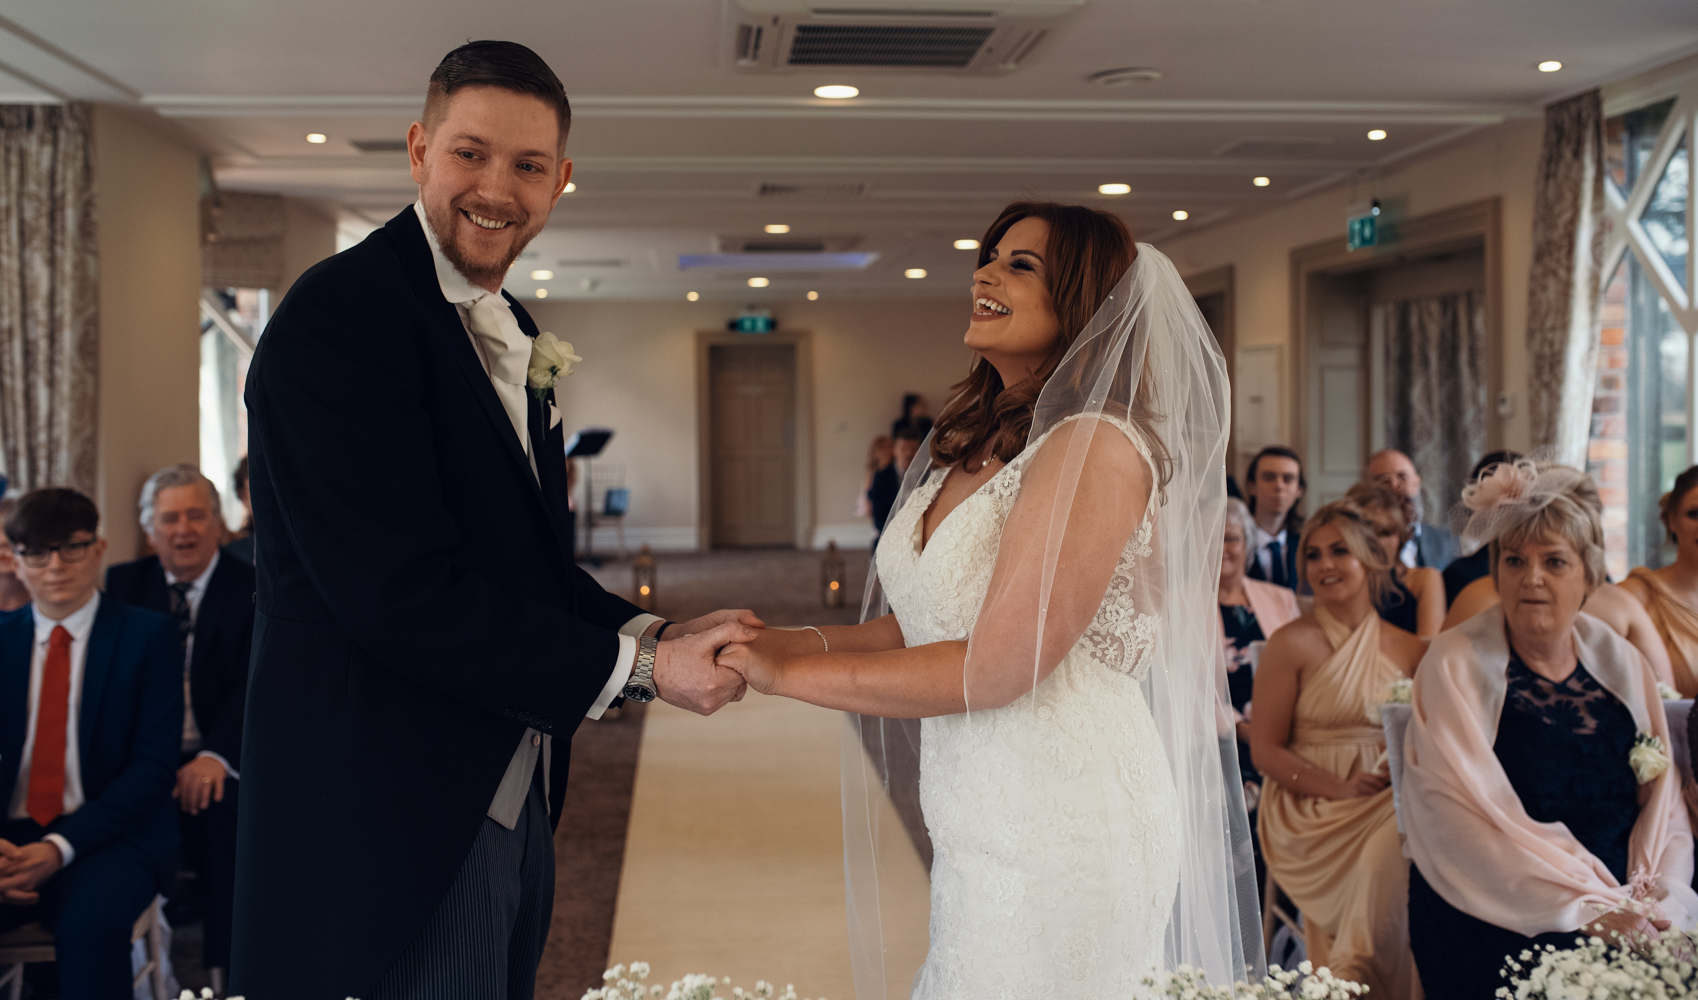 The moment the bride and groom say I do